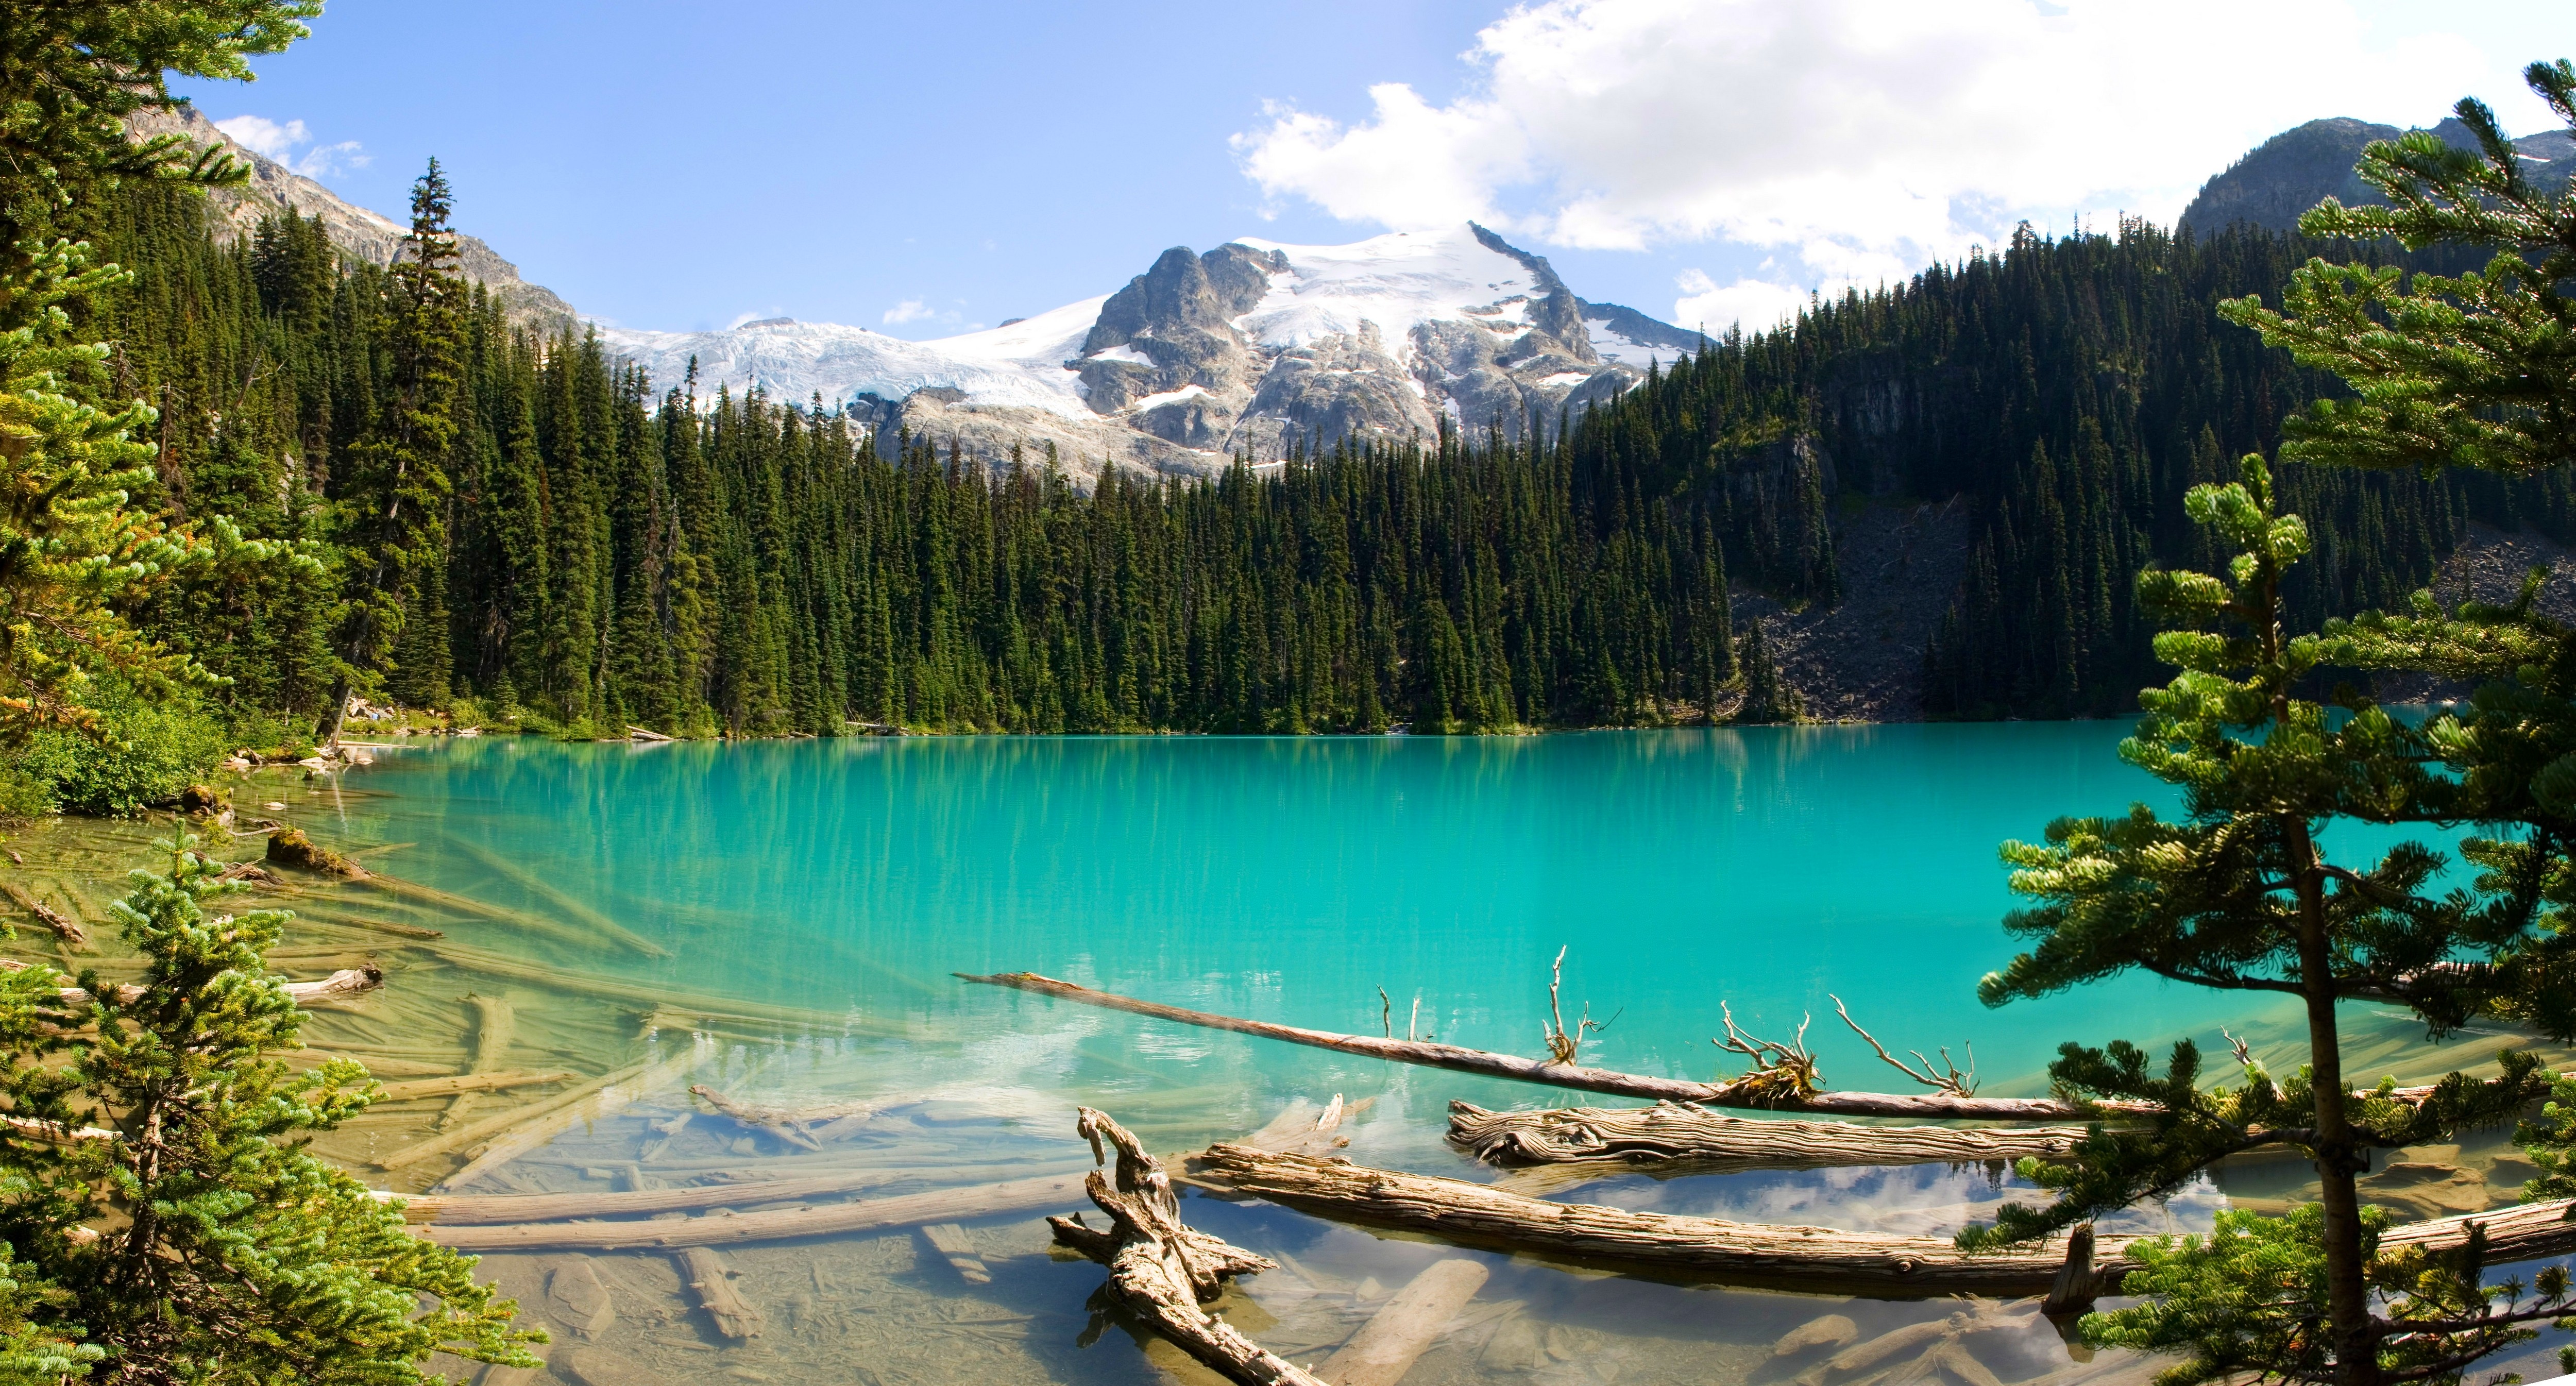 General 5000x2690 British Columbia Canada lake forest mountains turquoise water snowy peak nature landscape